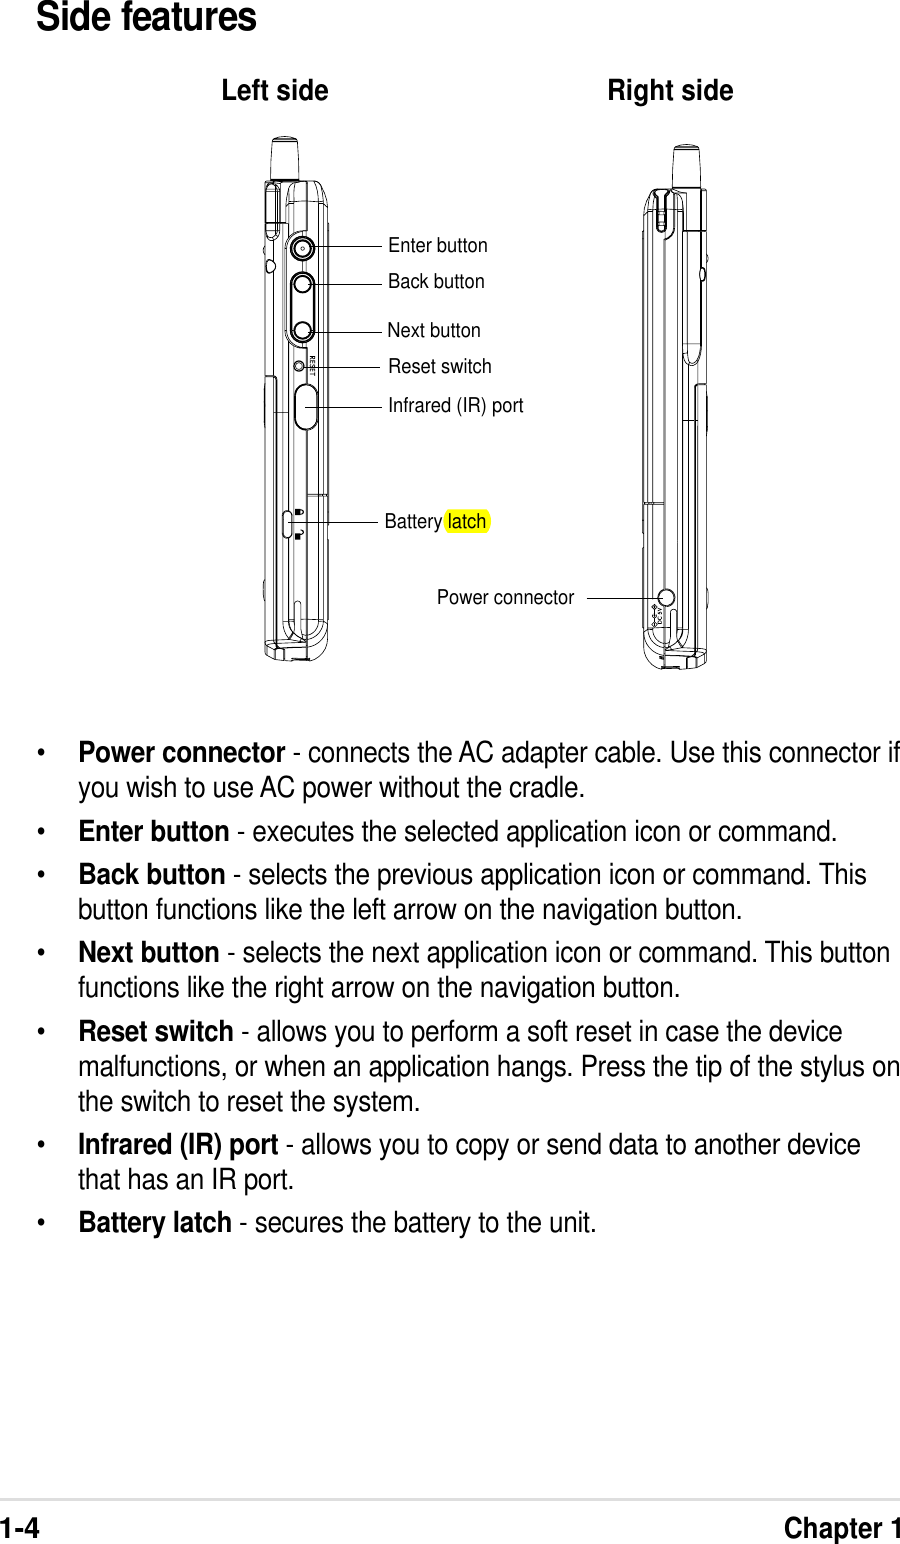 1-4Chapter 1Side features•Power connector - connects the AC adapter cable. Use this connector ifyou wish to use AC power without the cradle.•Enter button - executes the selected application icon or command.•Back button - selects the previous application icon or command. Thisbutton functions like the left arrow on the navigation button.•Next button - selects the next application icon or command. This buttonfunctions like the right arrow on the navigation button.•Reset switch - allows you to perform a soft reset in case the devicemalfunctions, or when an application hangs. Press the tip of the stylus onthe switch to reset the system.•Infrared (IR) port - allows you to copy or send data to another devicethat has an IR port.•Battery latch - secures the battery to the unit.Left side Right sideEnter buttonBack buttonInfrared (IR) portReset switchNext buttonPower connectorBattery latch